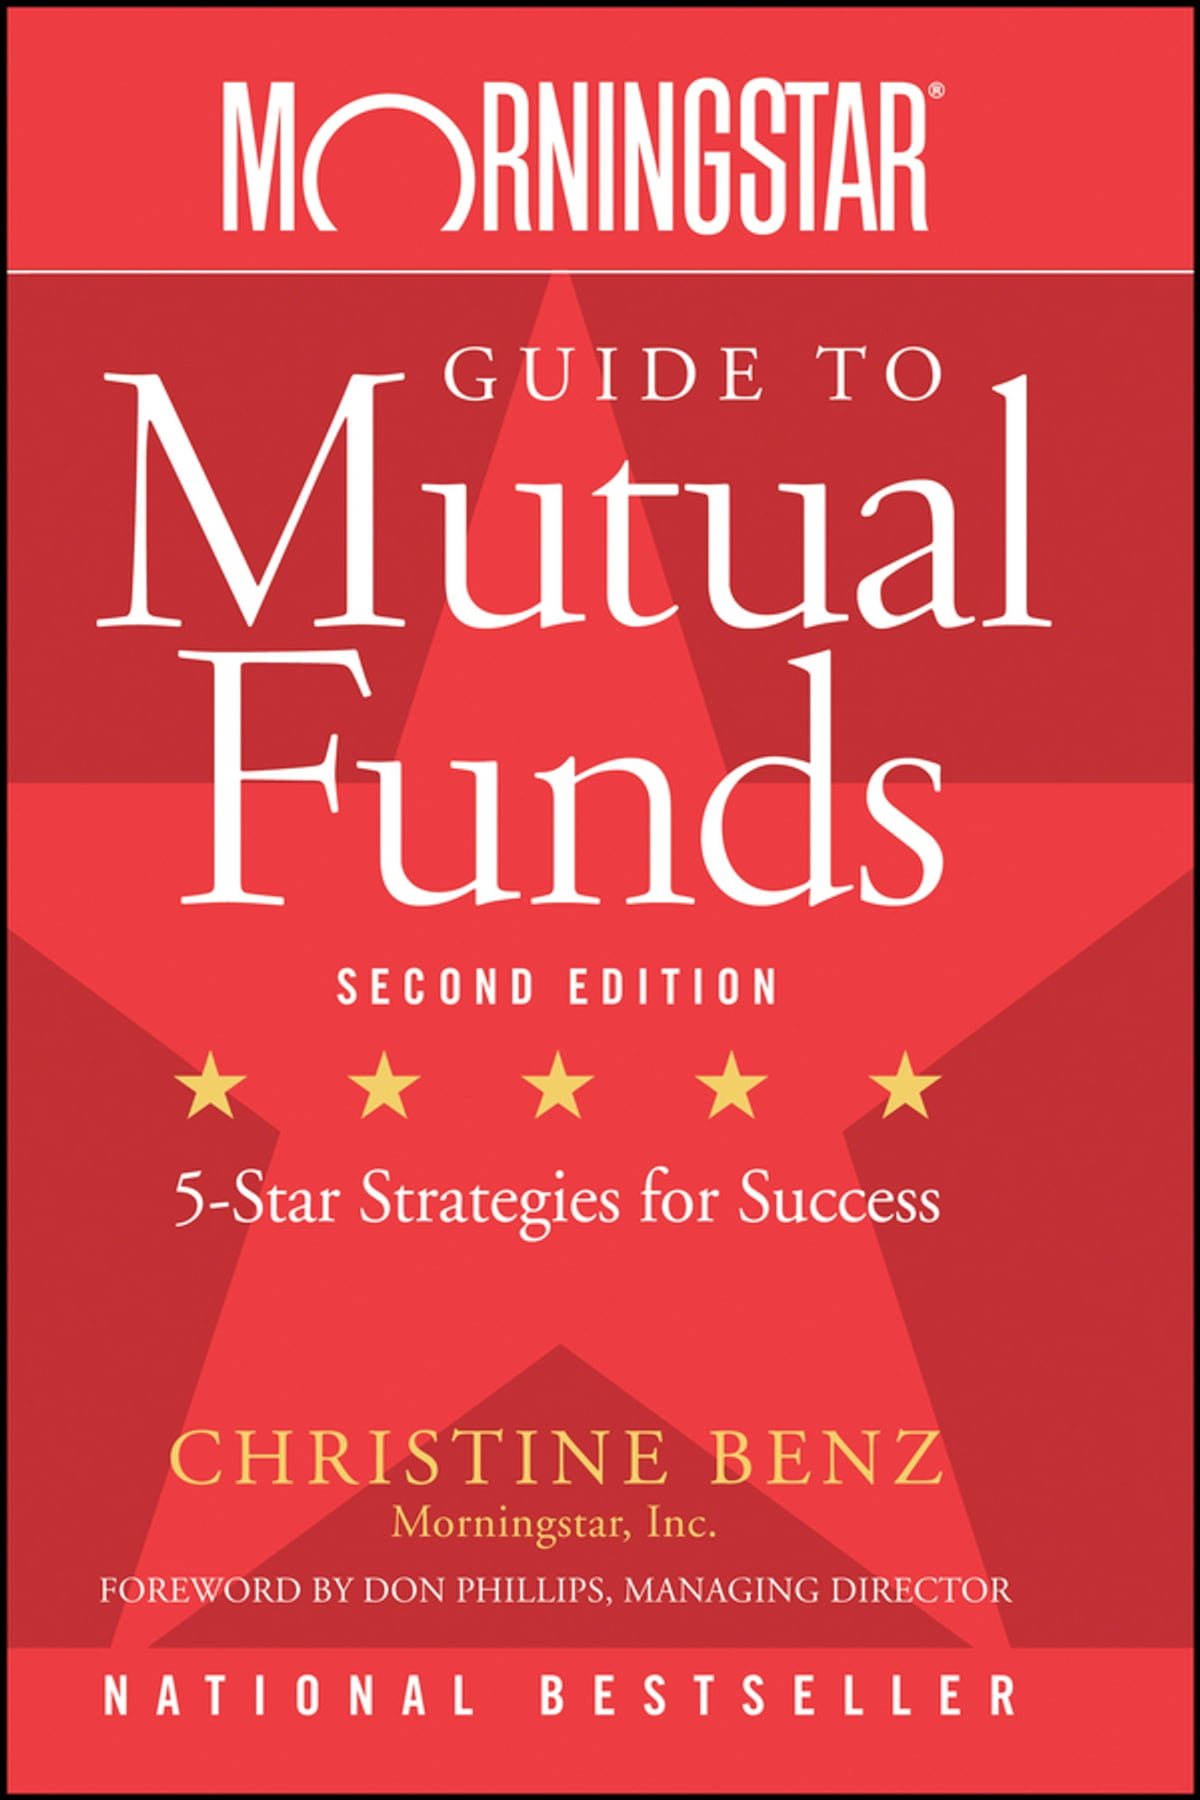 Christine Benz - Morningstar Guide to Mutual Funds